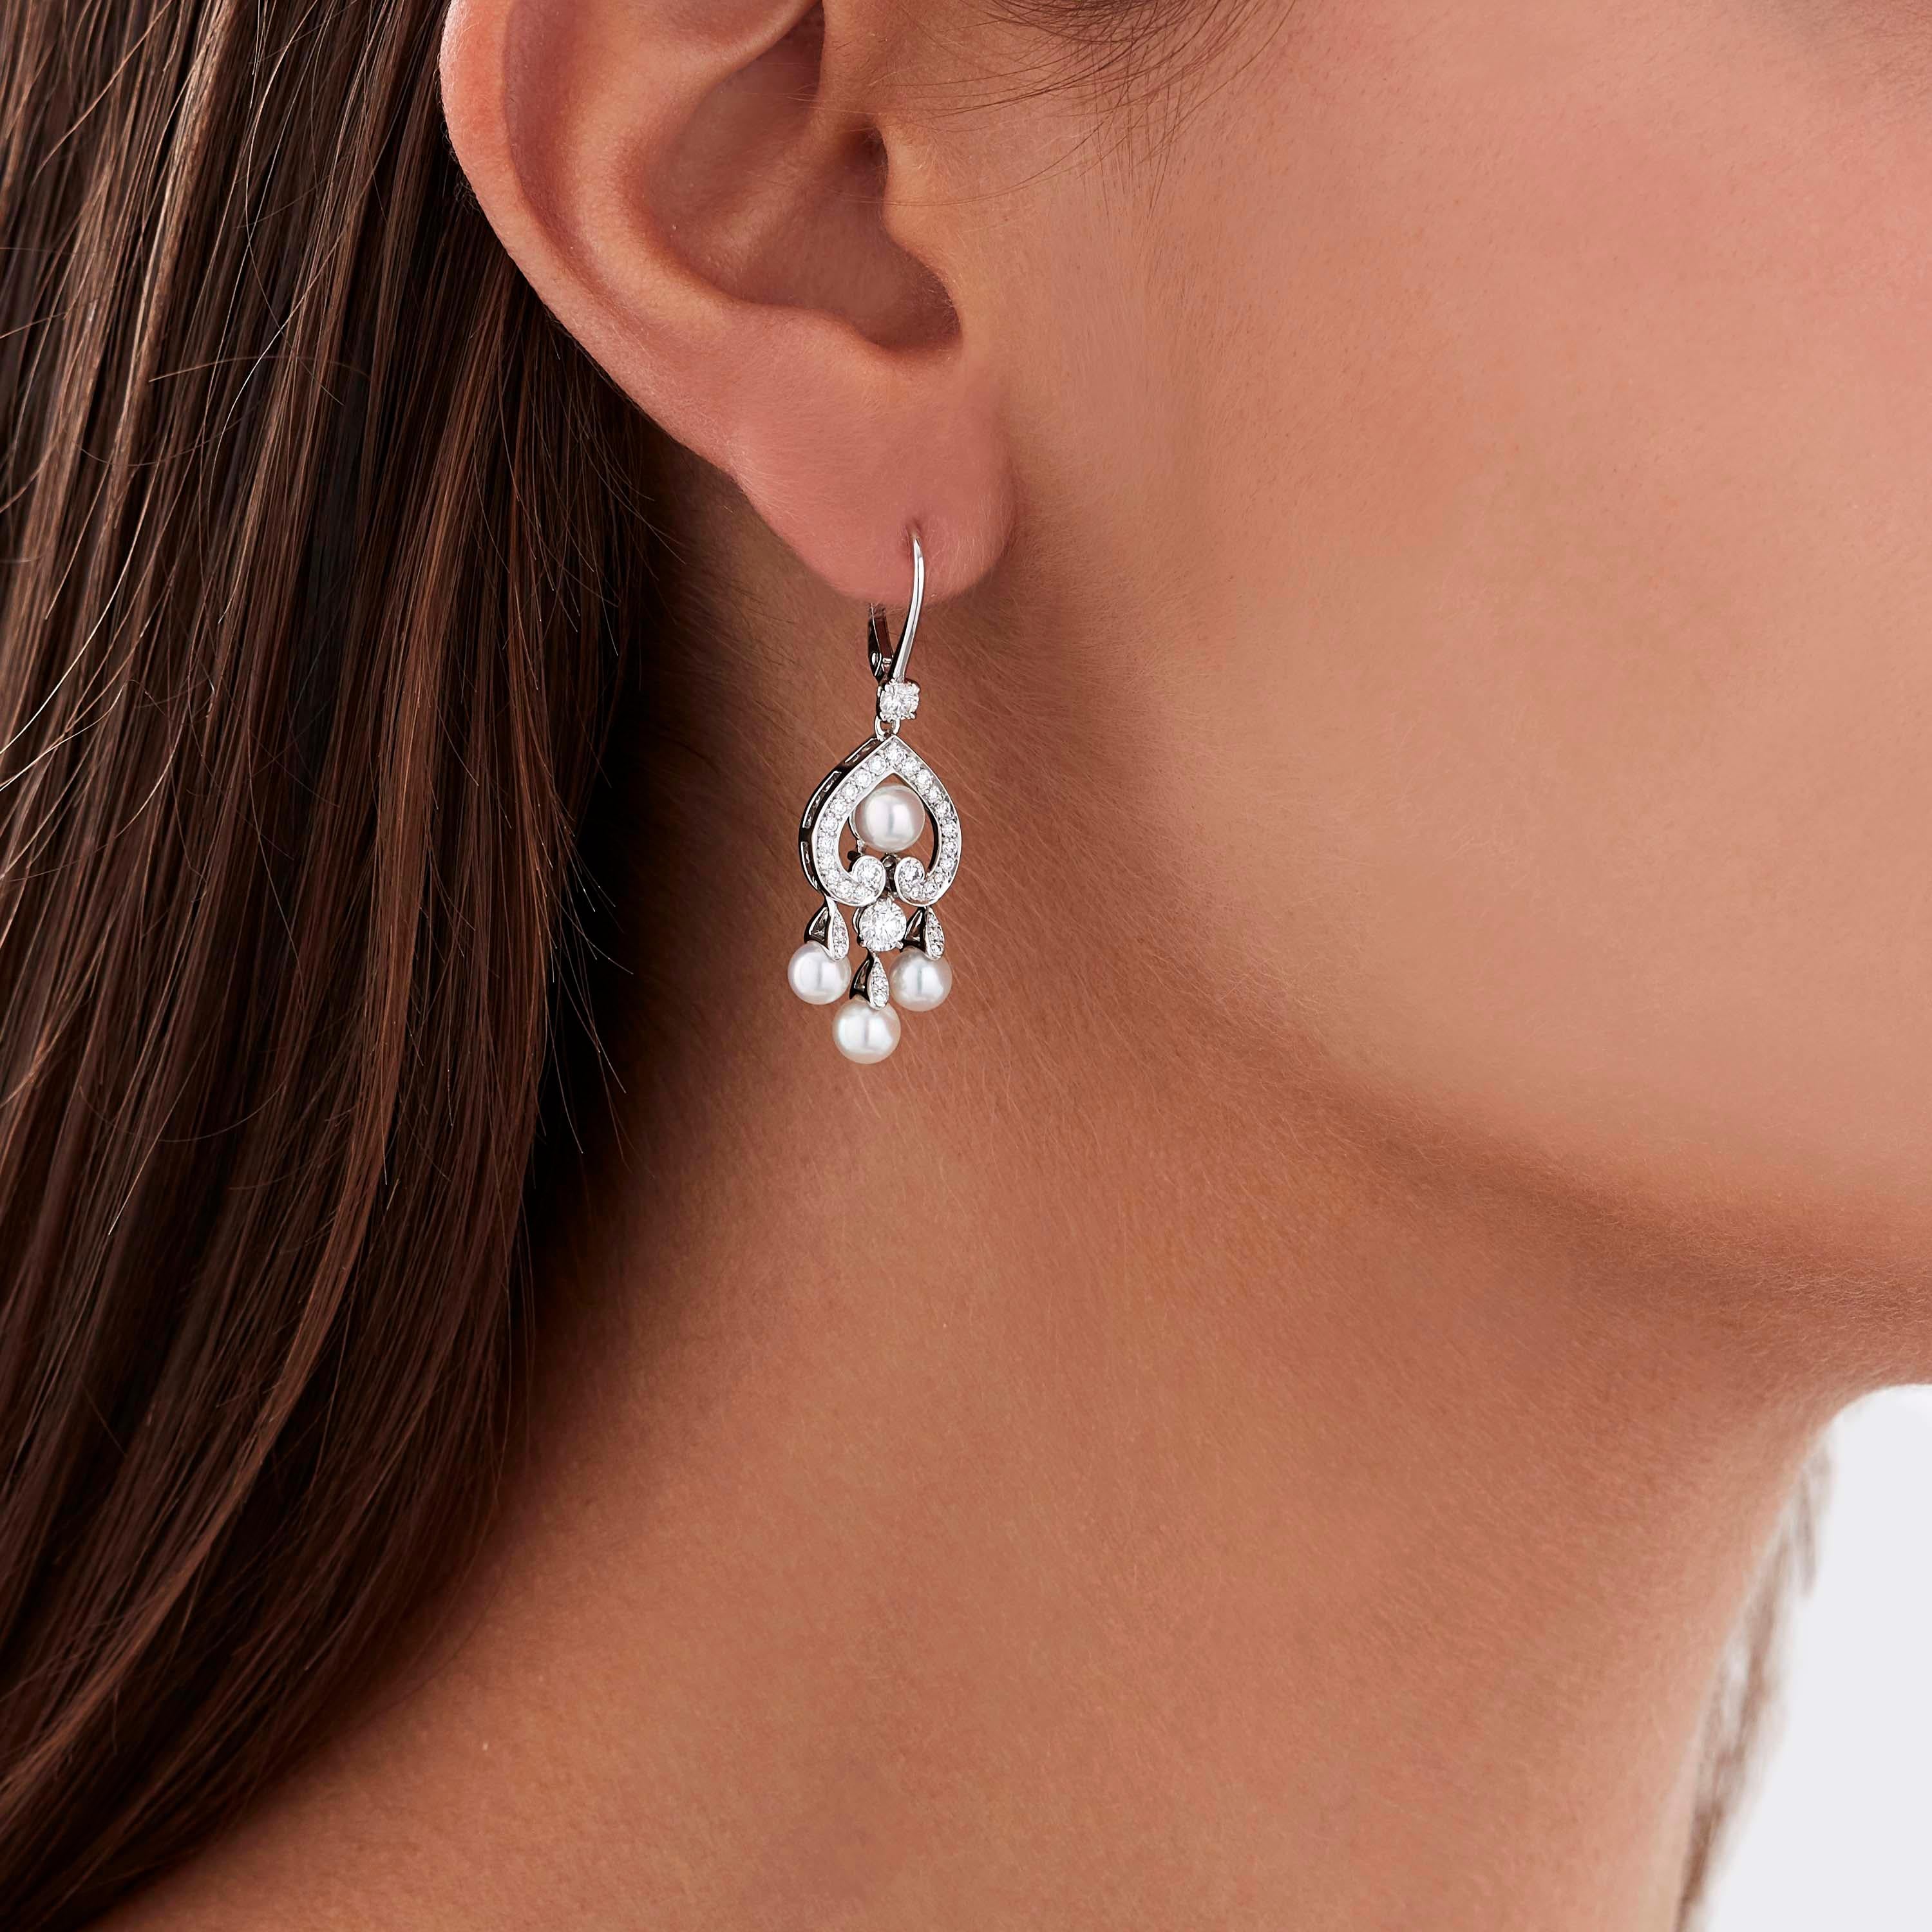 A House of Garrard pair of 18 karat white gold earrings from the 'Regal Cascade' collection, set with round white diamonds and round white cultured pearls. 

68 round white diamonds weighing: 0.93cts
8 round white cultured pearls

The House of